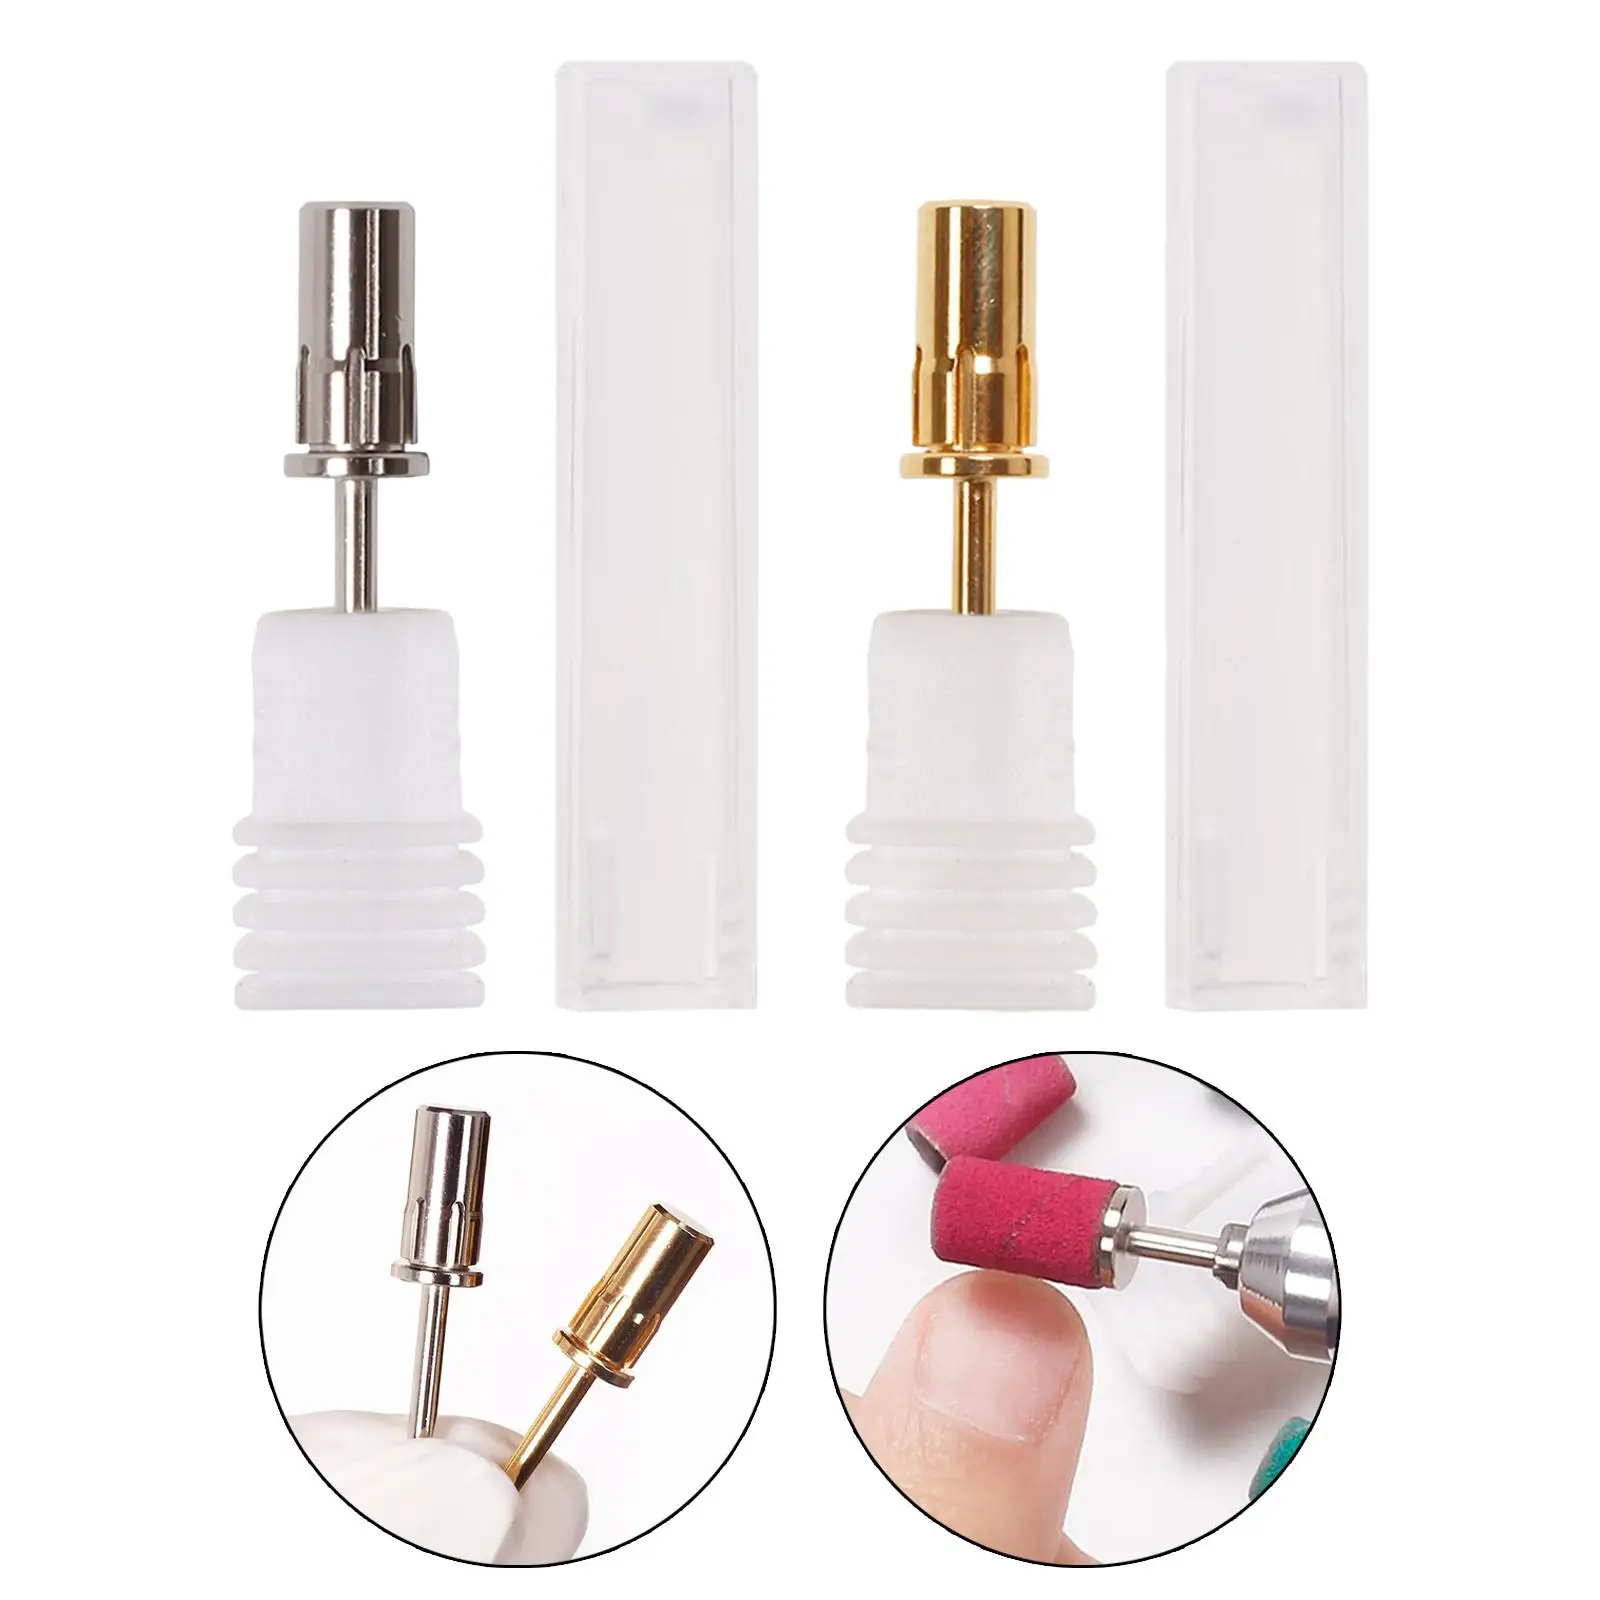 Nail Drill Bit Durable High Performance Nail Drill Accessories Stainless Steel Shaft Nail Drill Bits for Acrylics Gel Nails